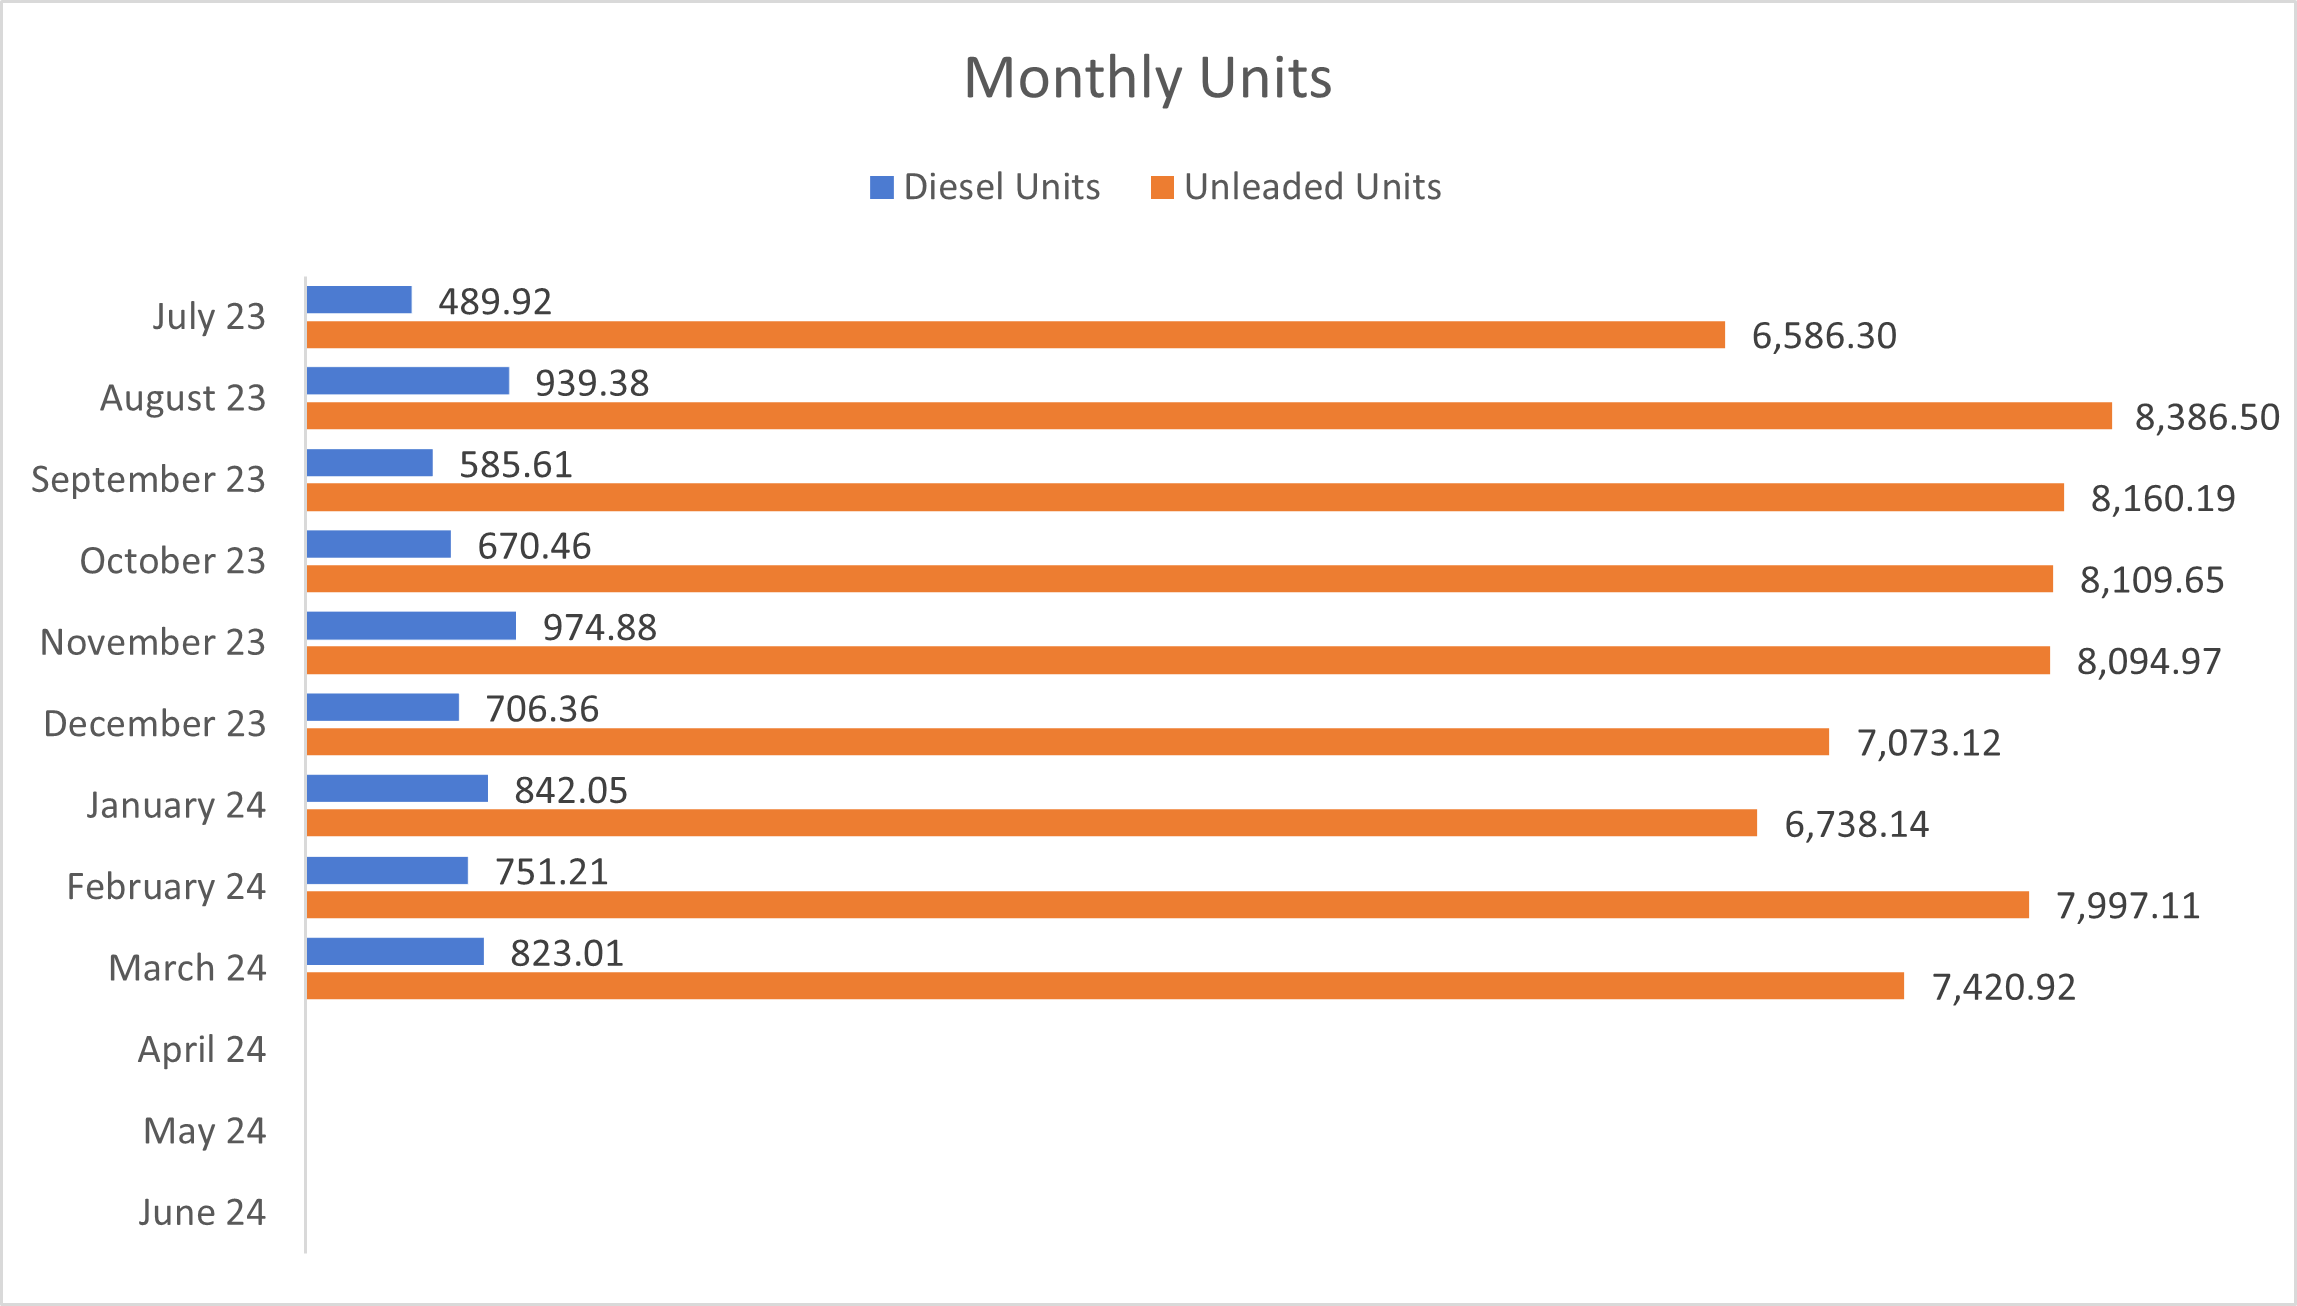 Bar chart indicating monthly units of diesel and unleaded fuel through March